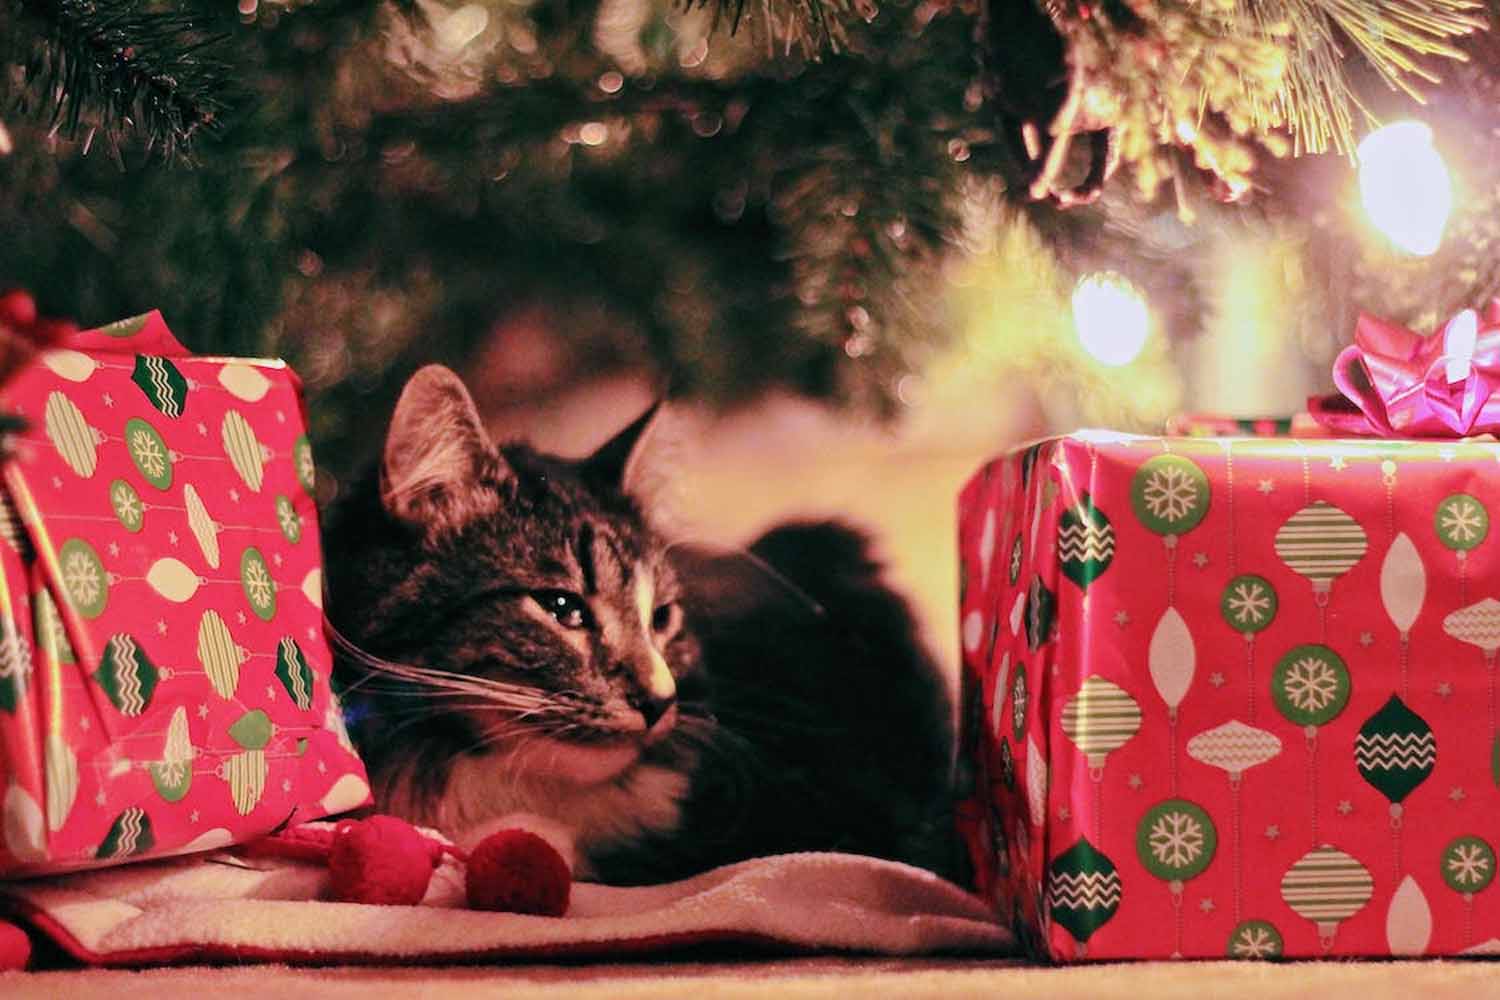 Cat nestled between two wrapped holiday gifts beneath a Christmas tree surrounded by lights illuminating the scene with a warm white.